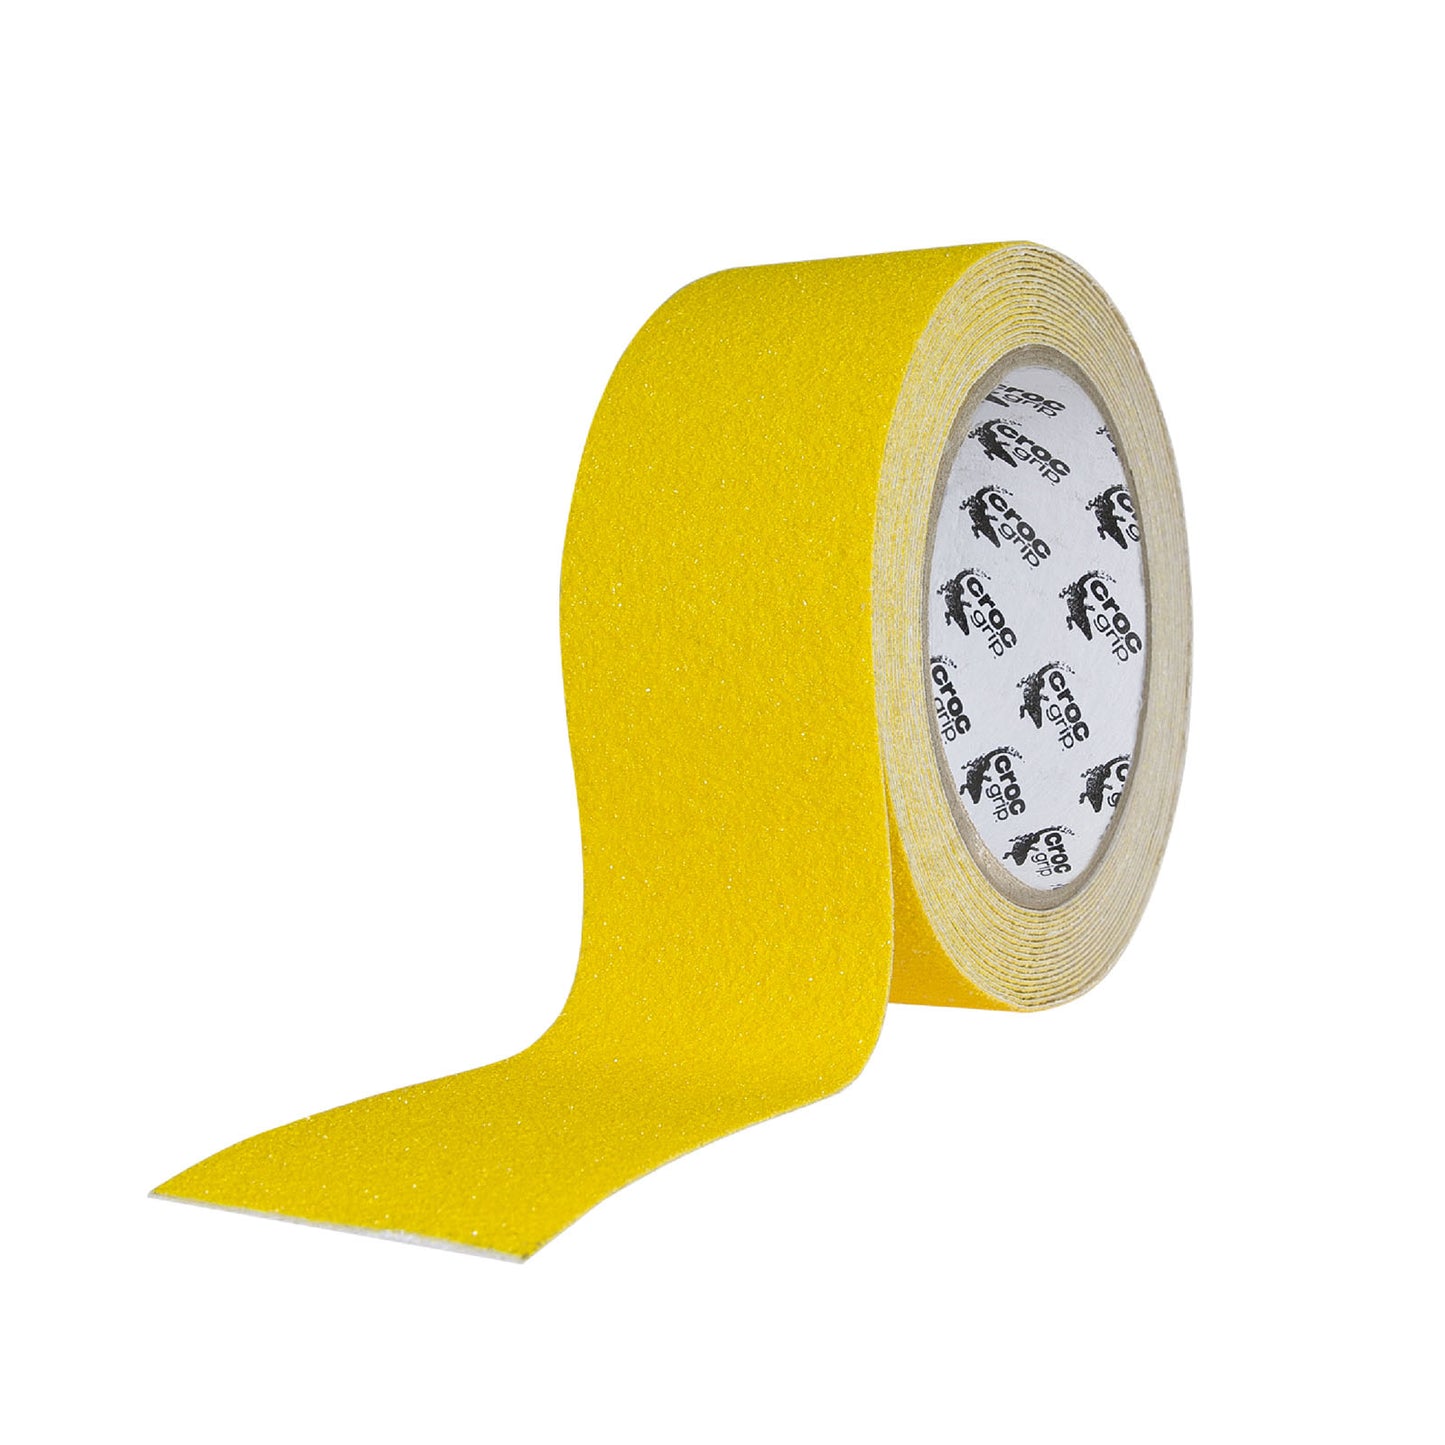 5M x 50MM Yellow Commercial High Grit Anti-Slip Tape